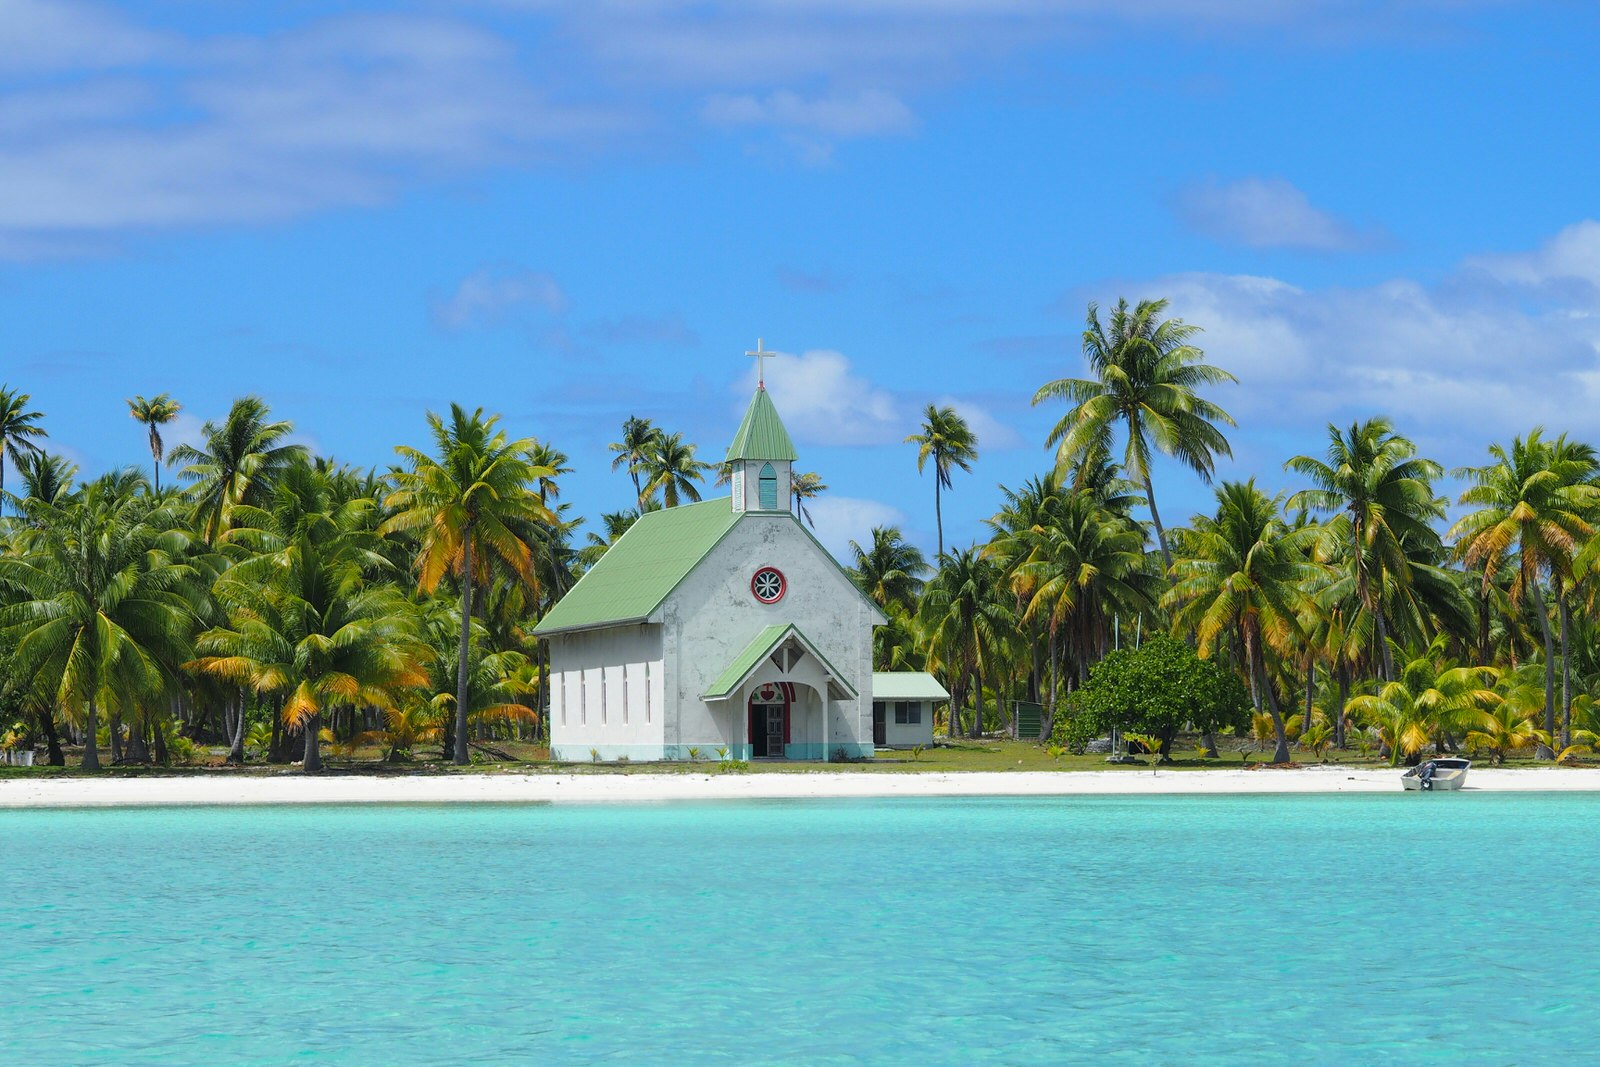 An abandoned church viewed from the water on Anaa, French Polynesia